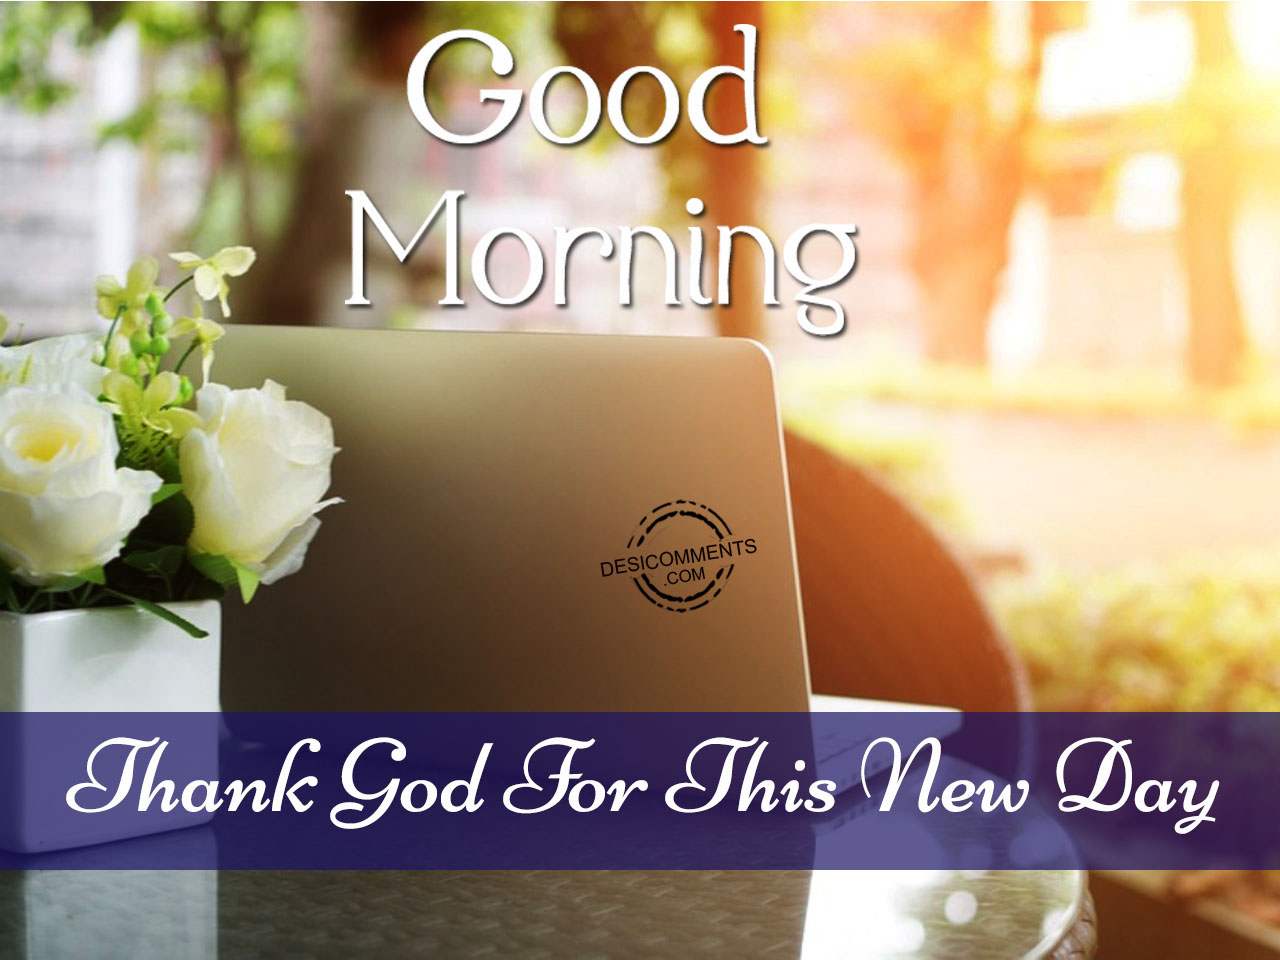 Good Morning -Thank God For This New Day - DesiComments.com